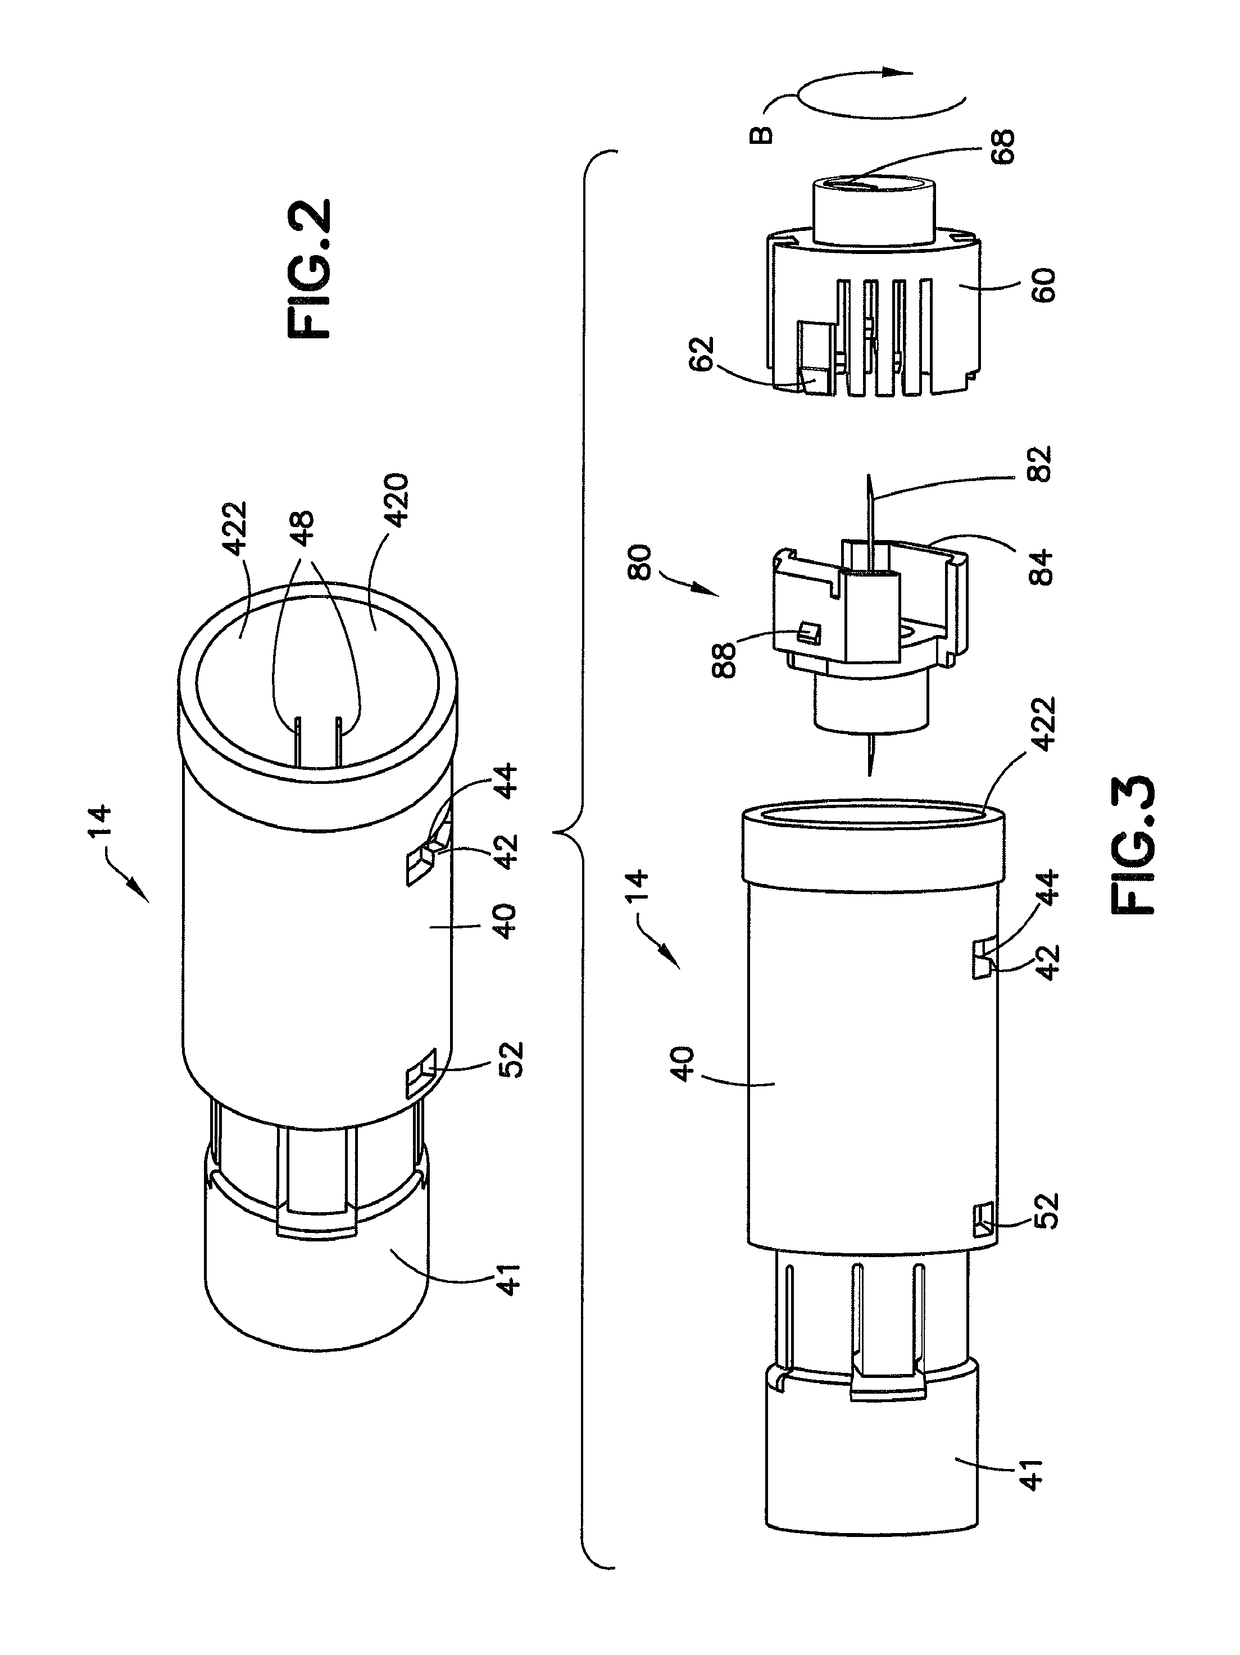 Transfer set with floating needle for drug reconstitution